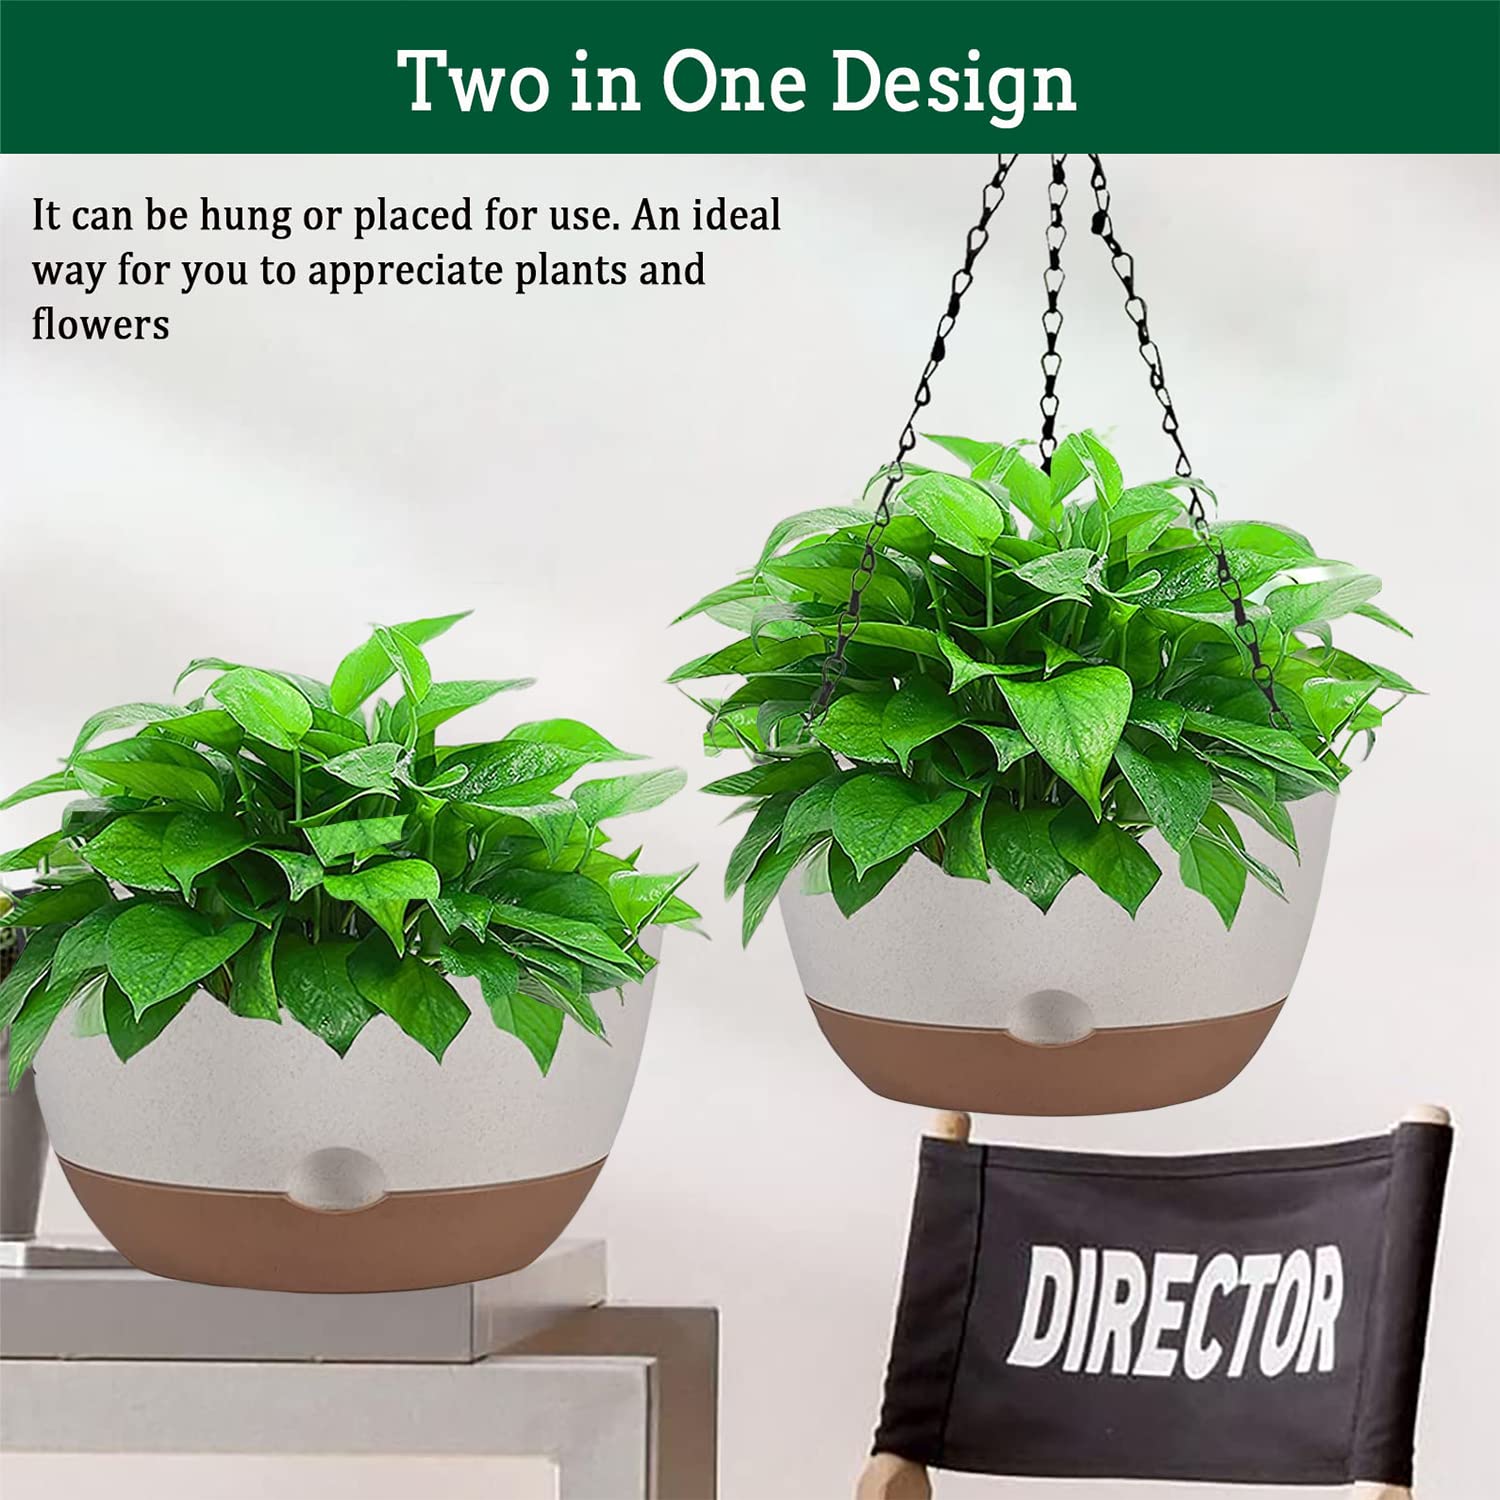 Koalaime Hanging Planter Self Watering 10 Inch, 2 Pack Indoor Outdoor Hanging Baskets, Hanging Flower Pots with Drainage Hole & 2 Kinds of Plant Hangers for Garden Home Decor(Cream)…